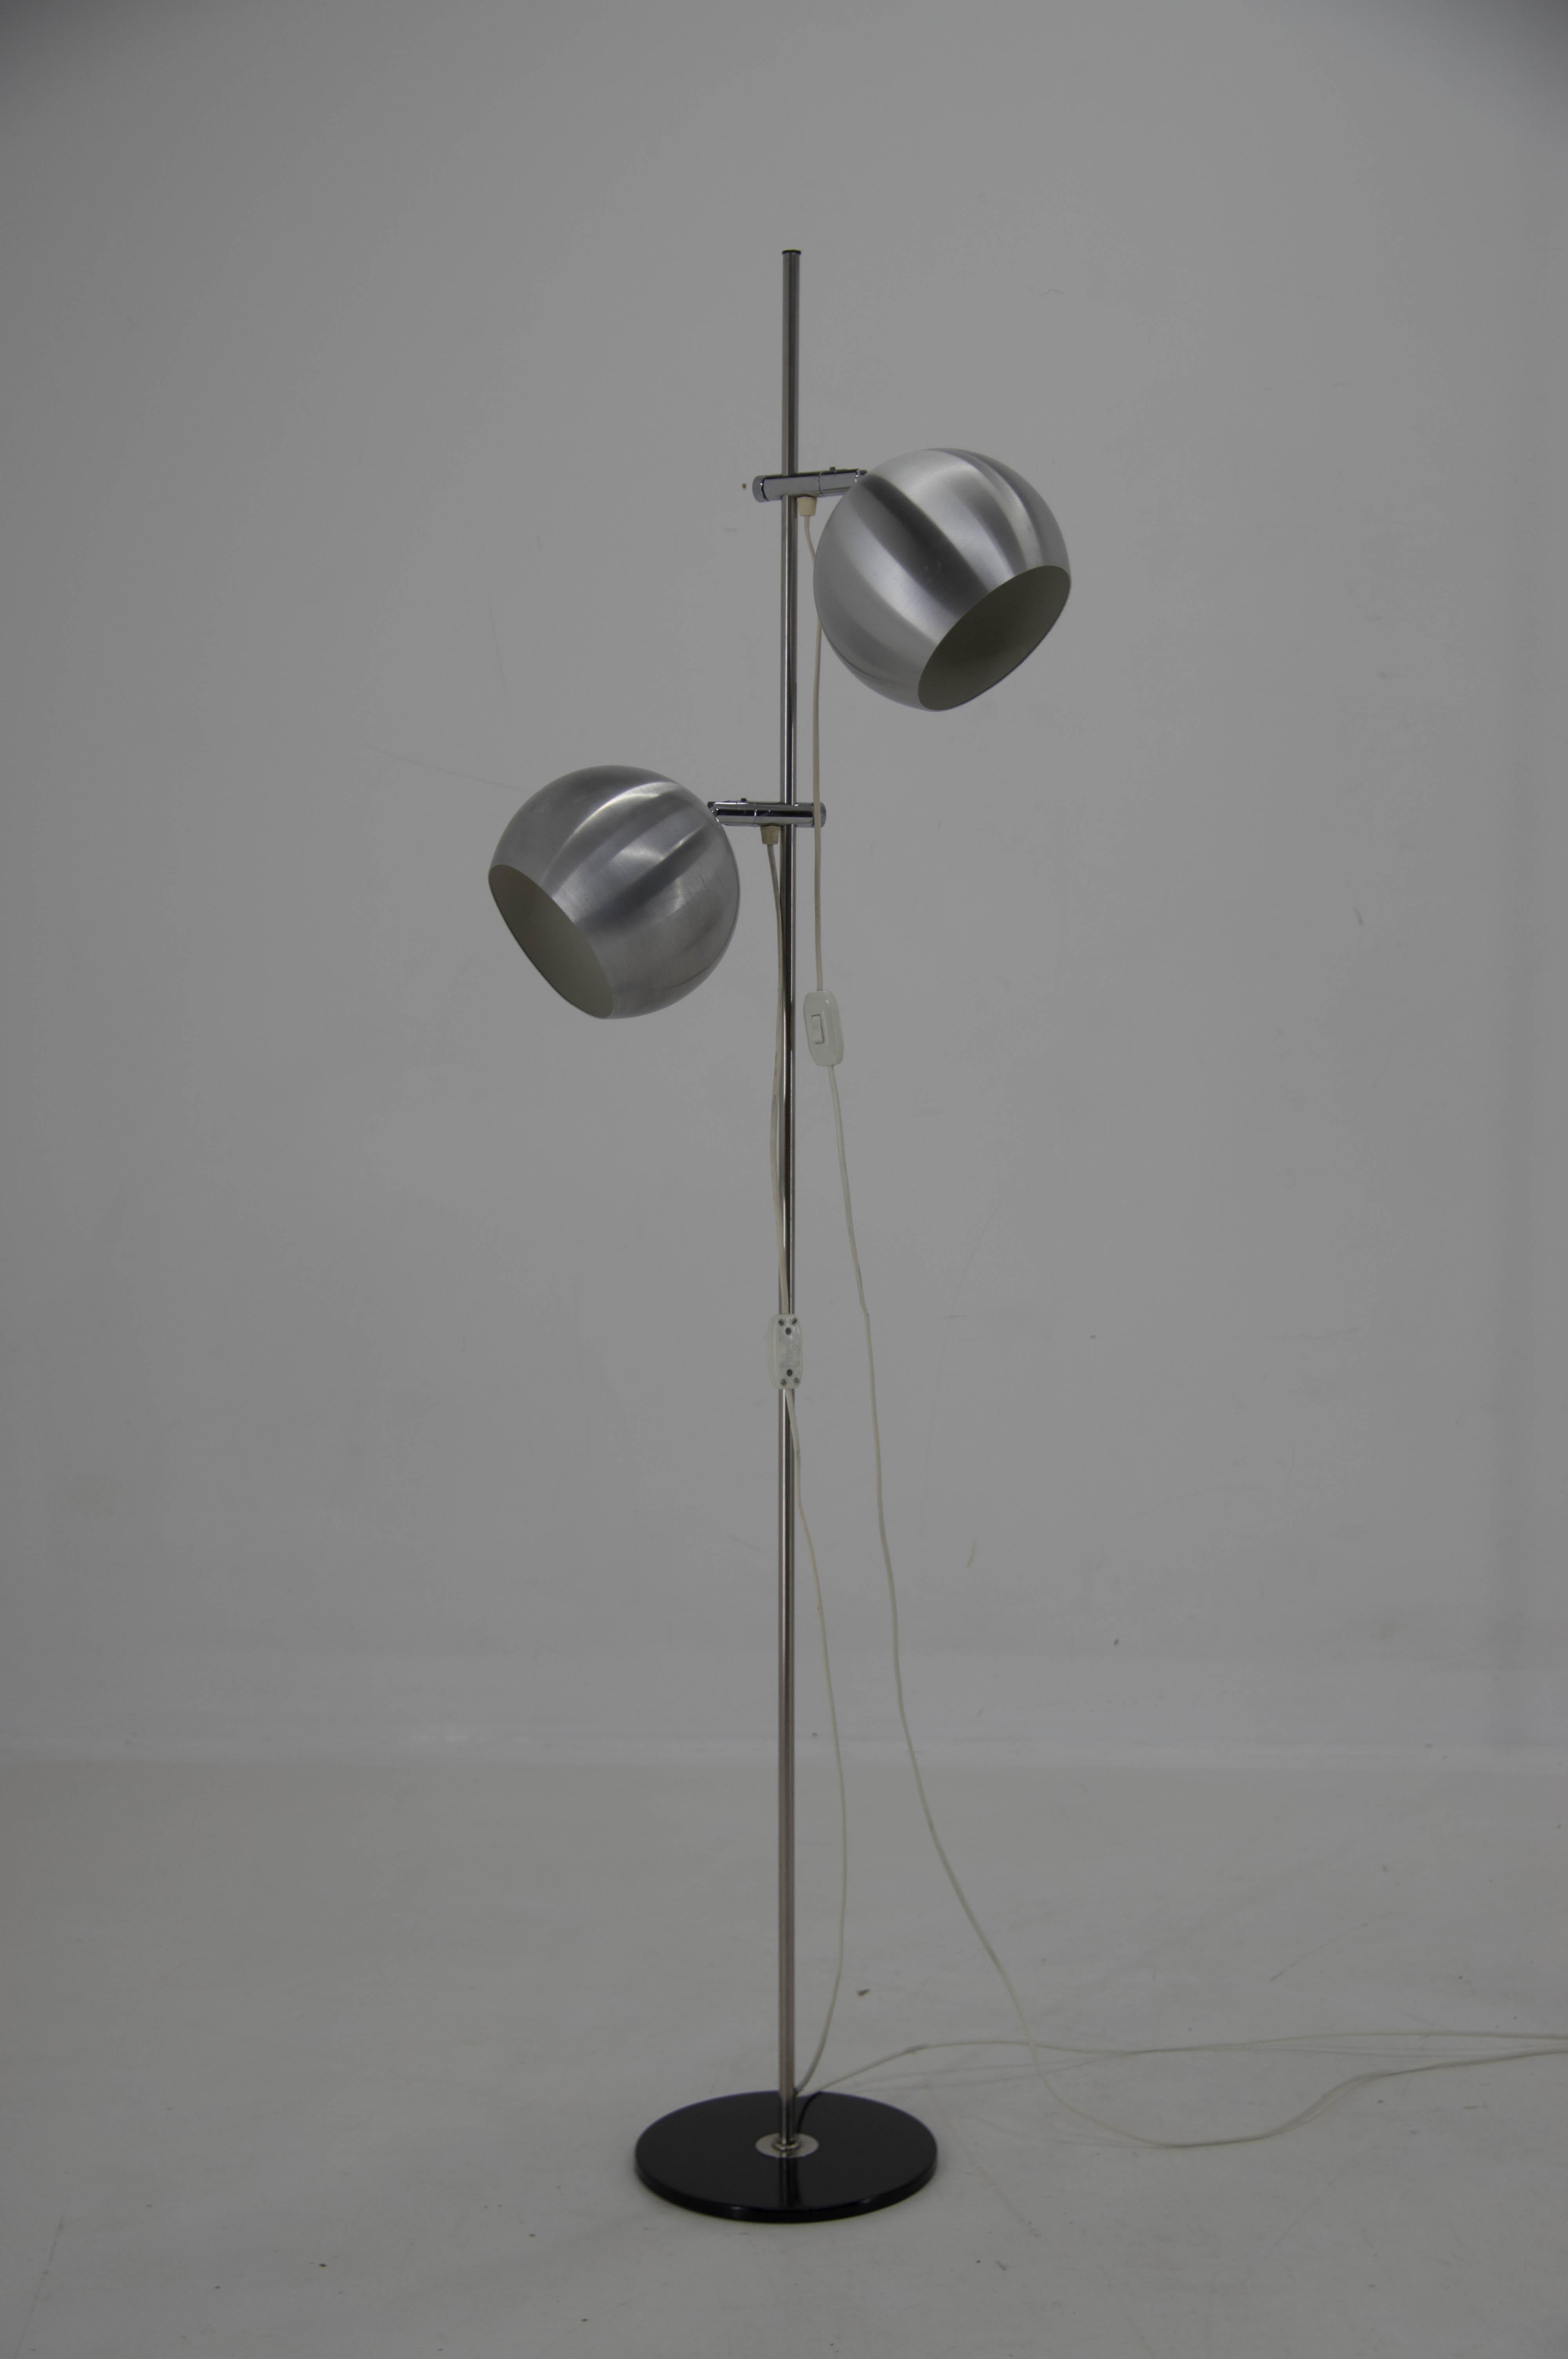 Elegant design floor lamp with flexible aluminum shades and adjustable height.
Rewired: 2x60W, E25-E27 bulbs
US plug adapter included